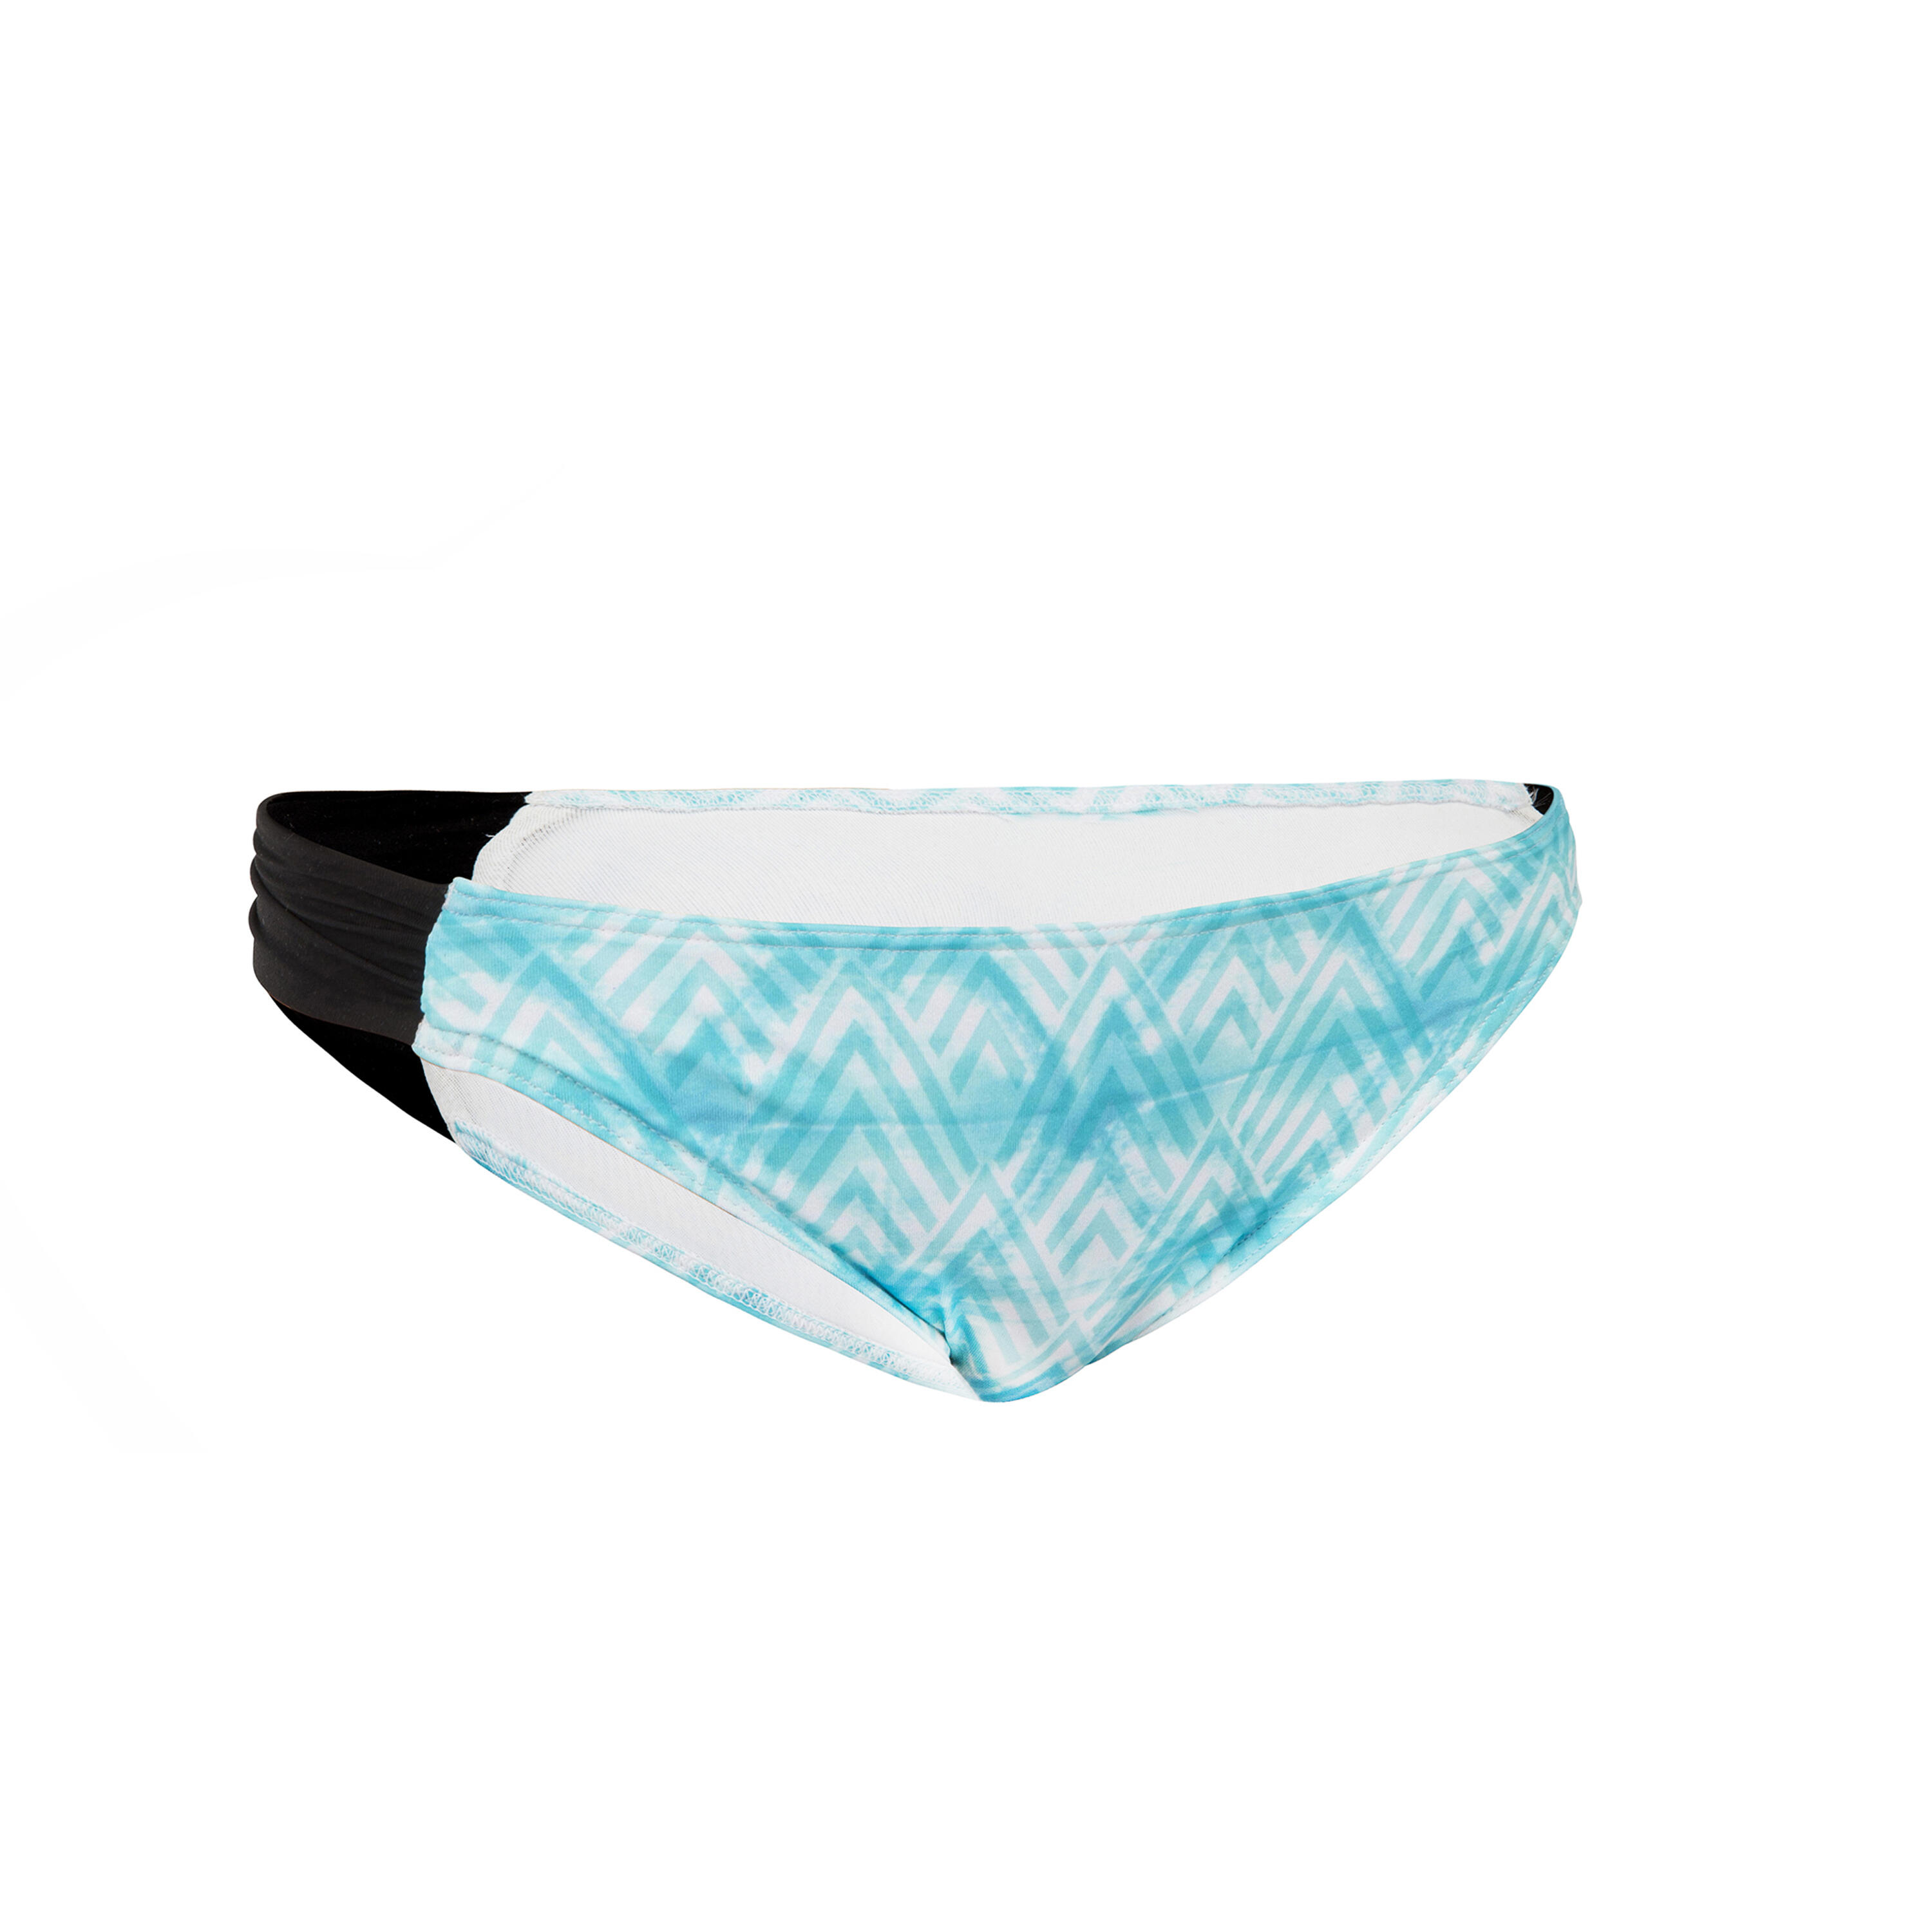 GIRL'S SURF Swimsuit bottoms MALOU 500 - TURQUOISE 3/6